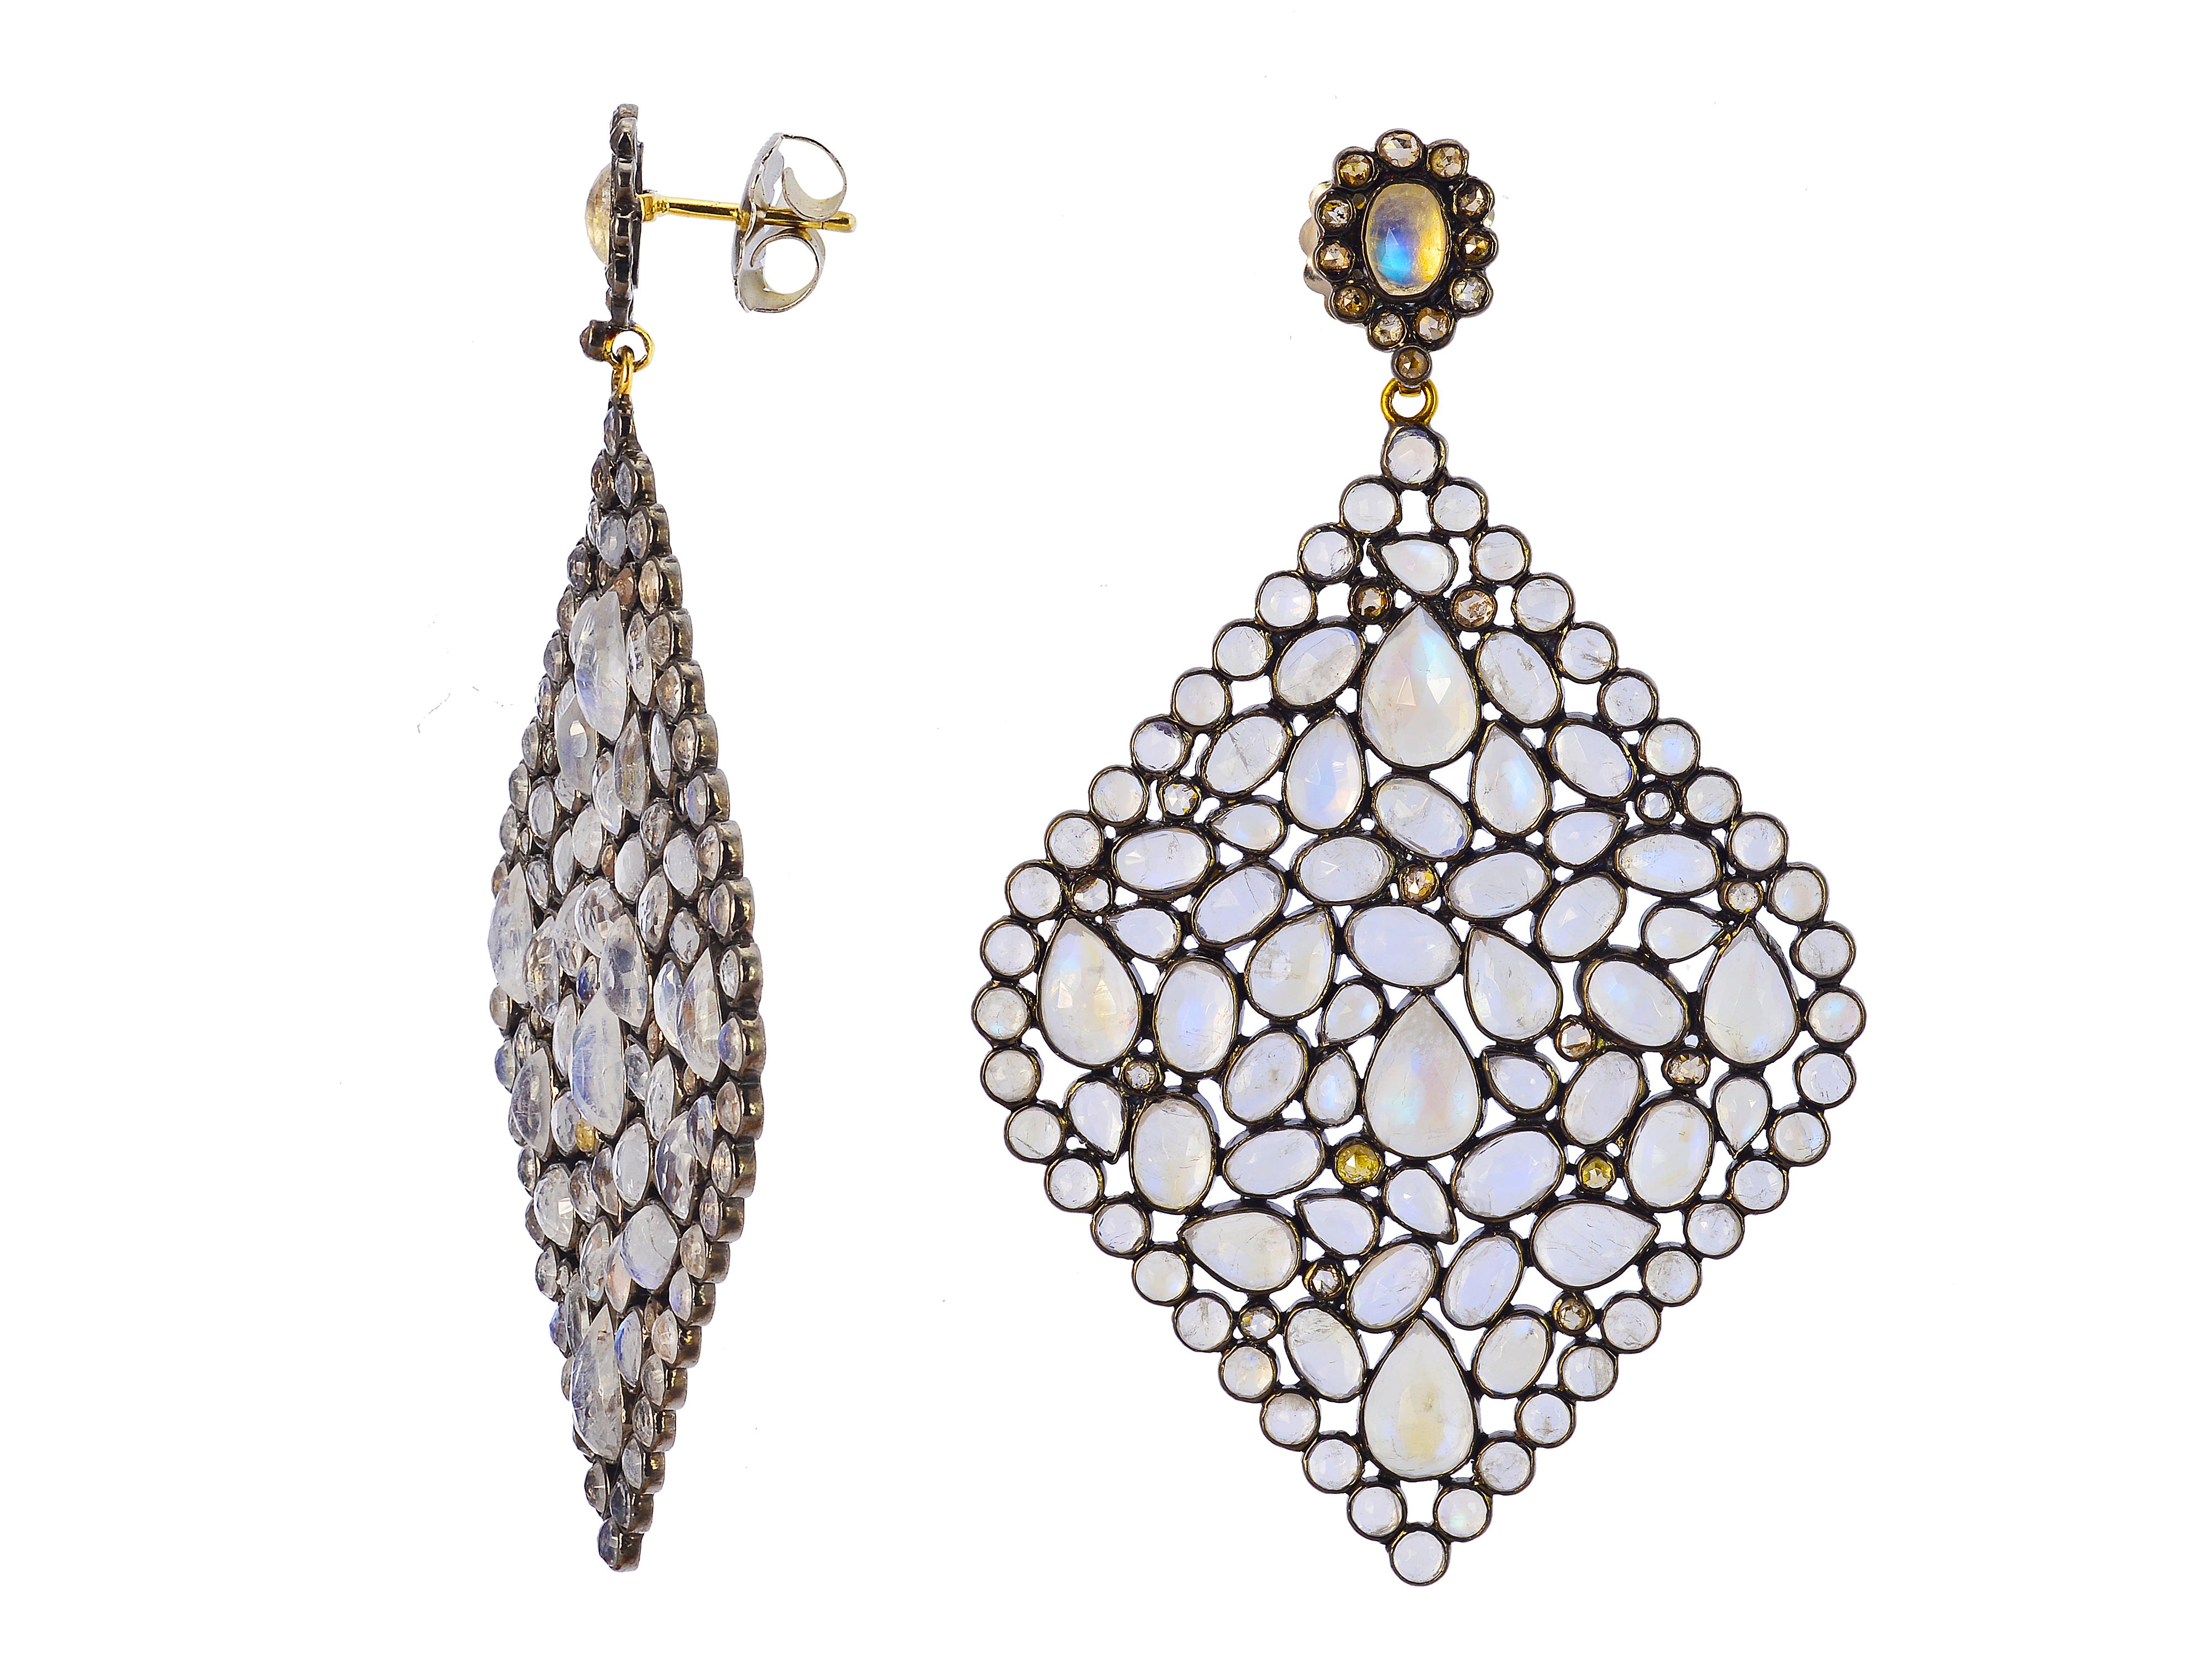 Sterling silver and 18 karat yellow gold statement earrings containing 34.10 carats of bezel-set moonstones. The clear gem stones have a blue adularescense, which is an optical sheen visible when light hits from the front. Post and large, supportive